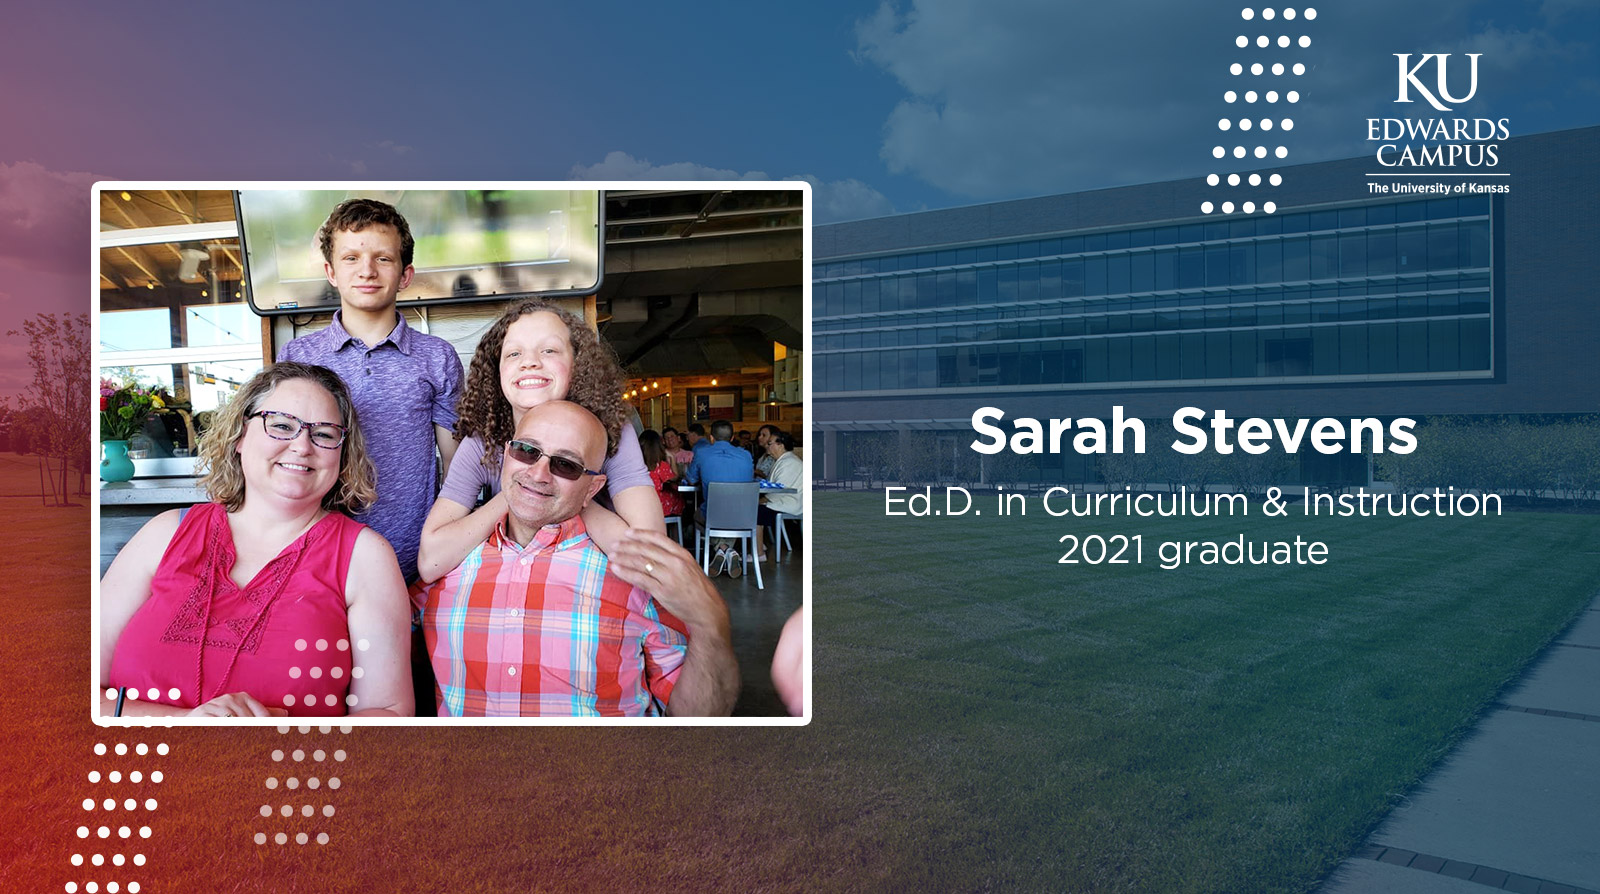 Sarah Stevens, Ed.D. in Curriculum and Instruction, poses with her family